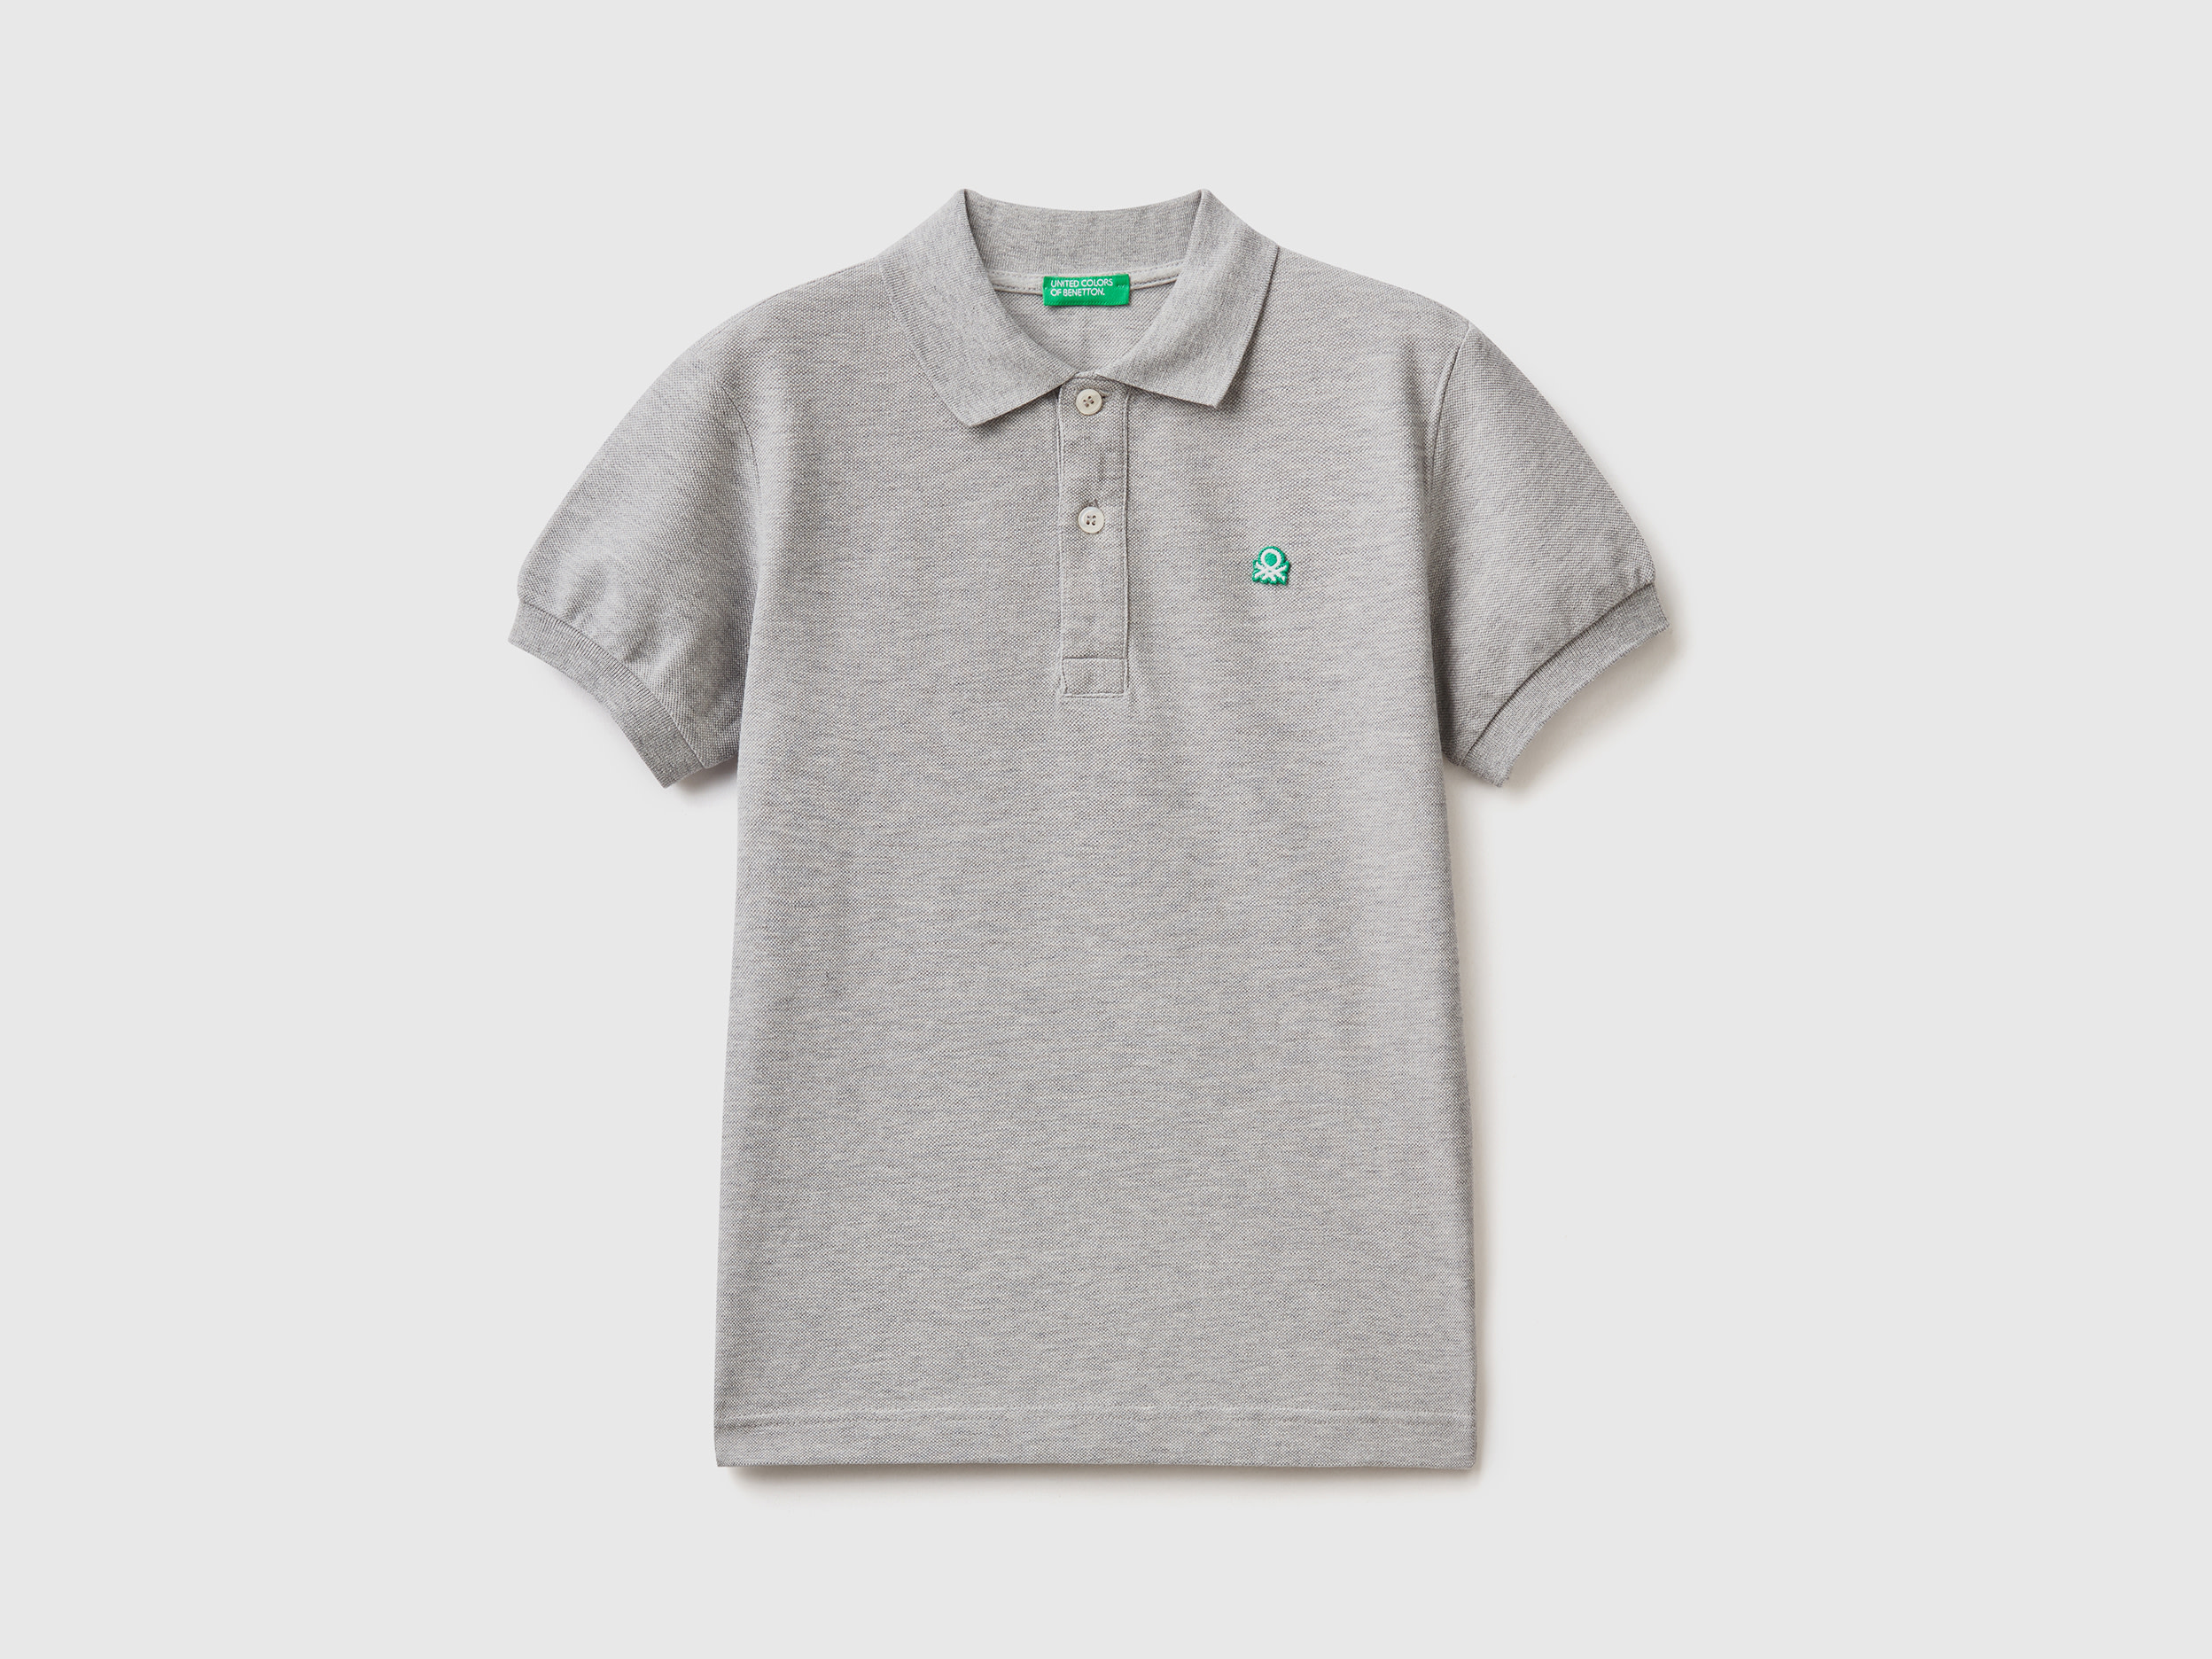 Image of Benetton, Slim Fit Polo In 100% Organic Cotton, size L, Light Gray, Kids